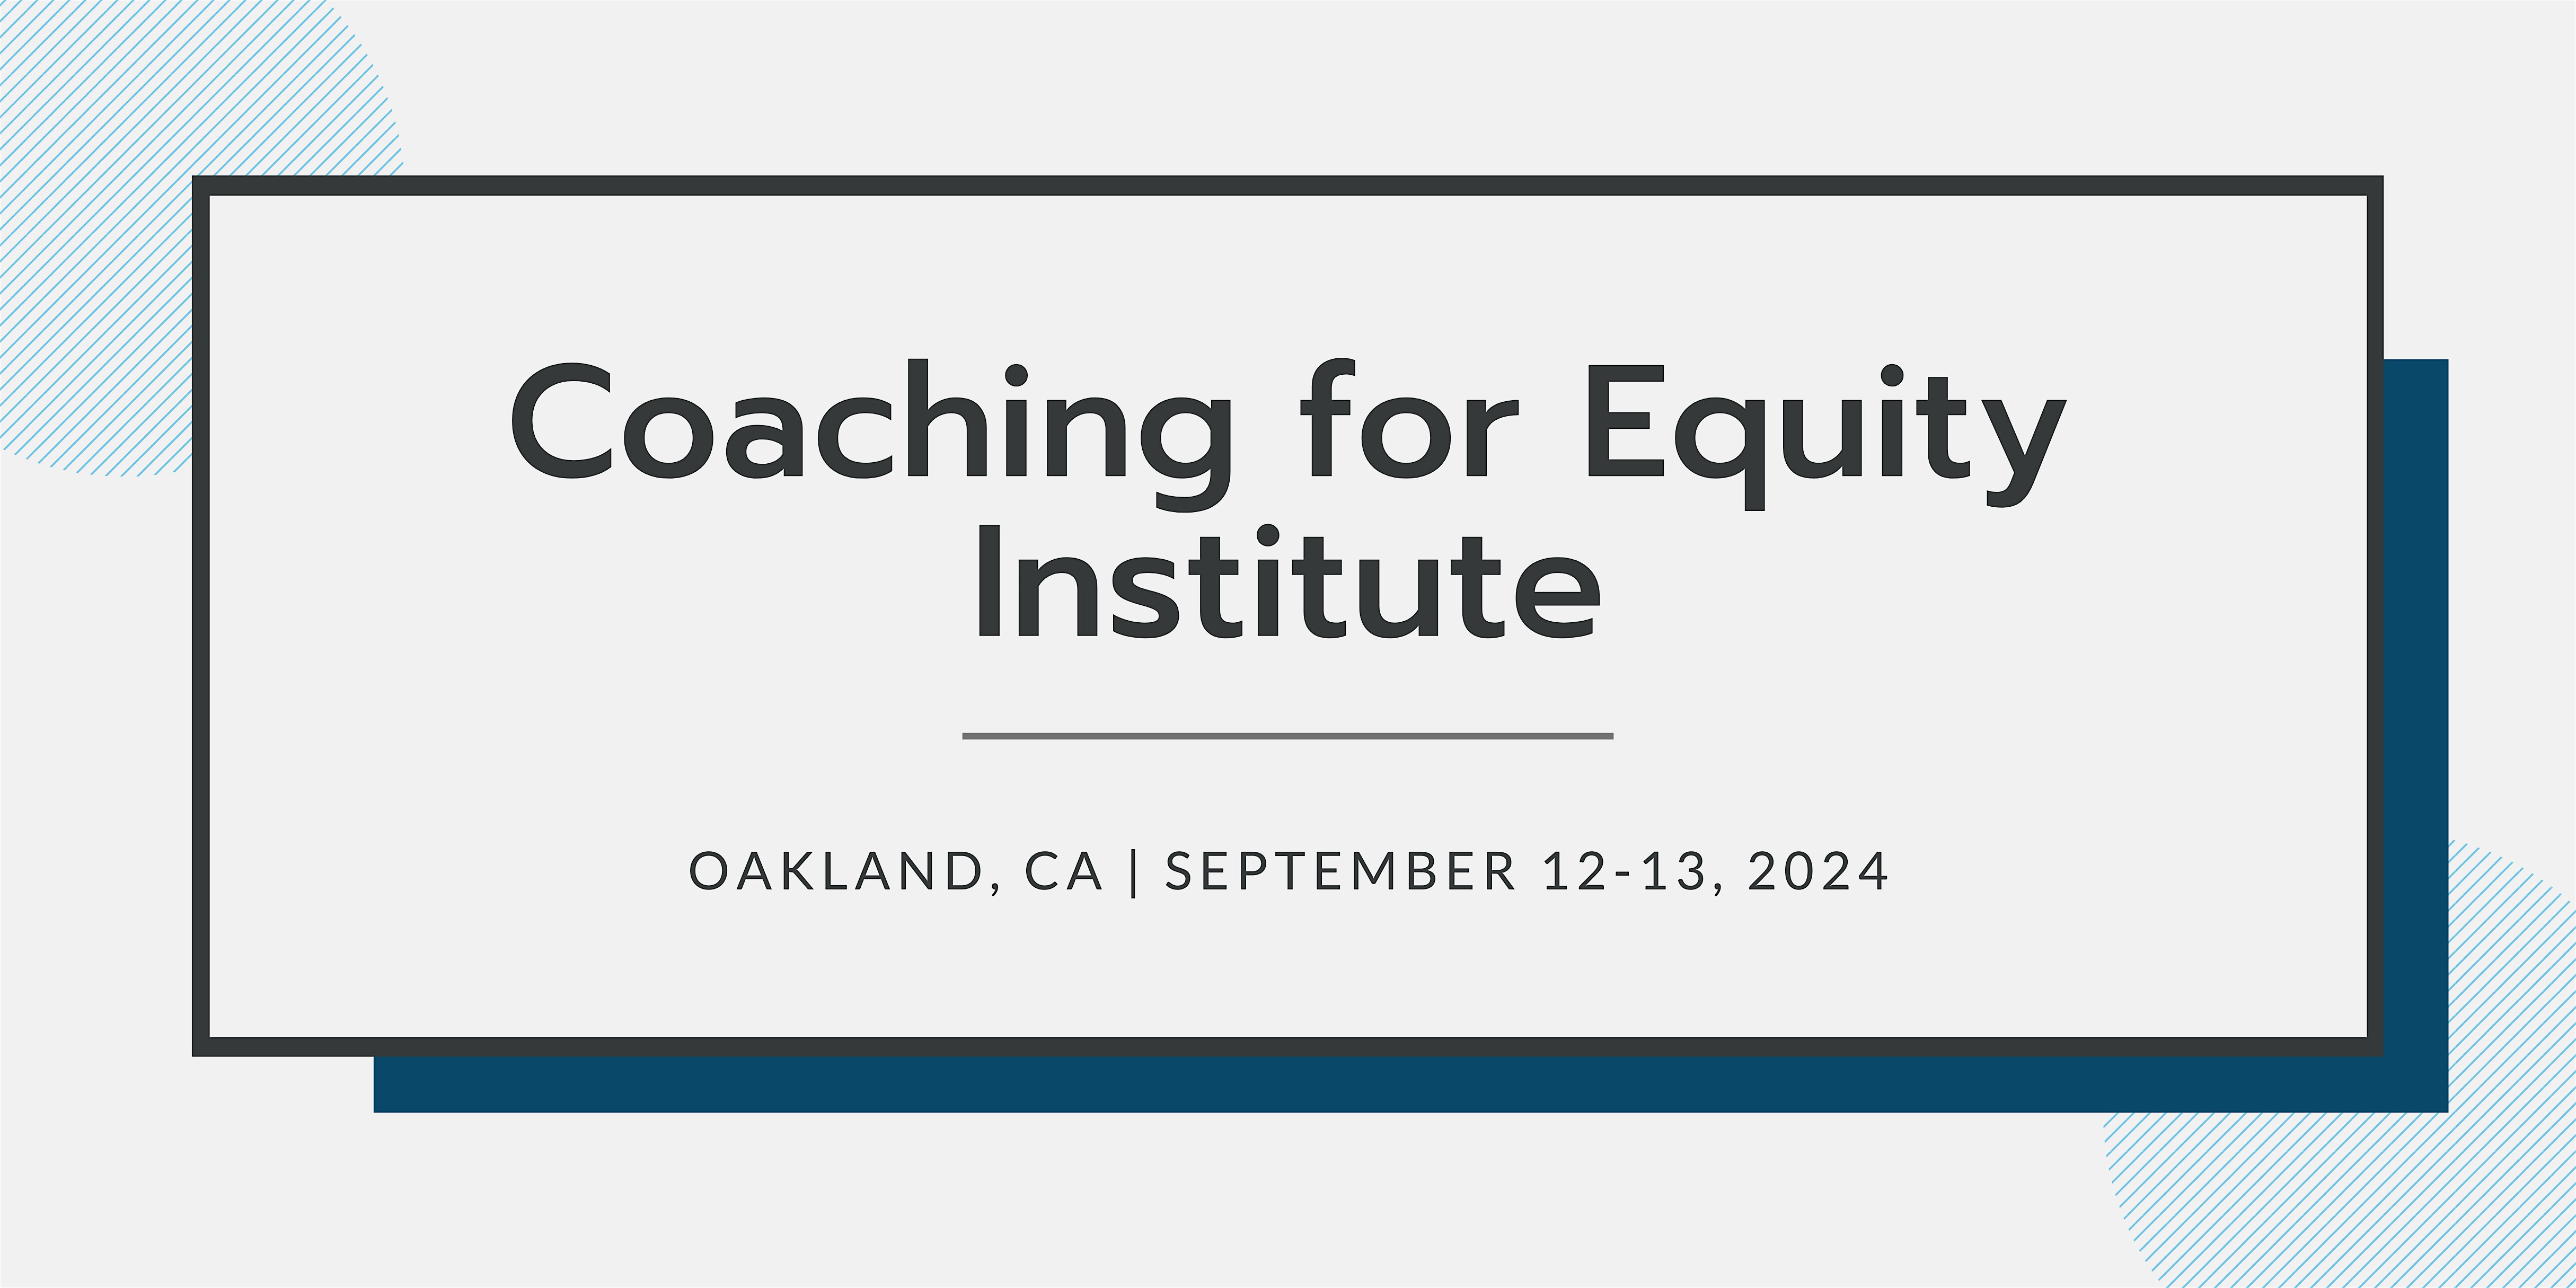 Coaching for Equity Institute | September 12-13, 2024 | CA